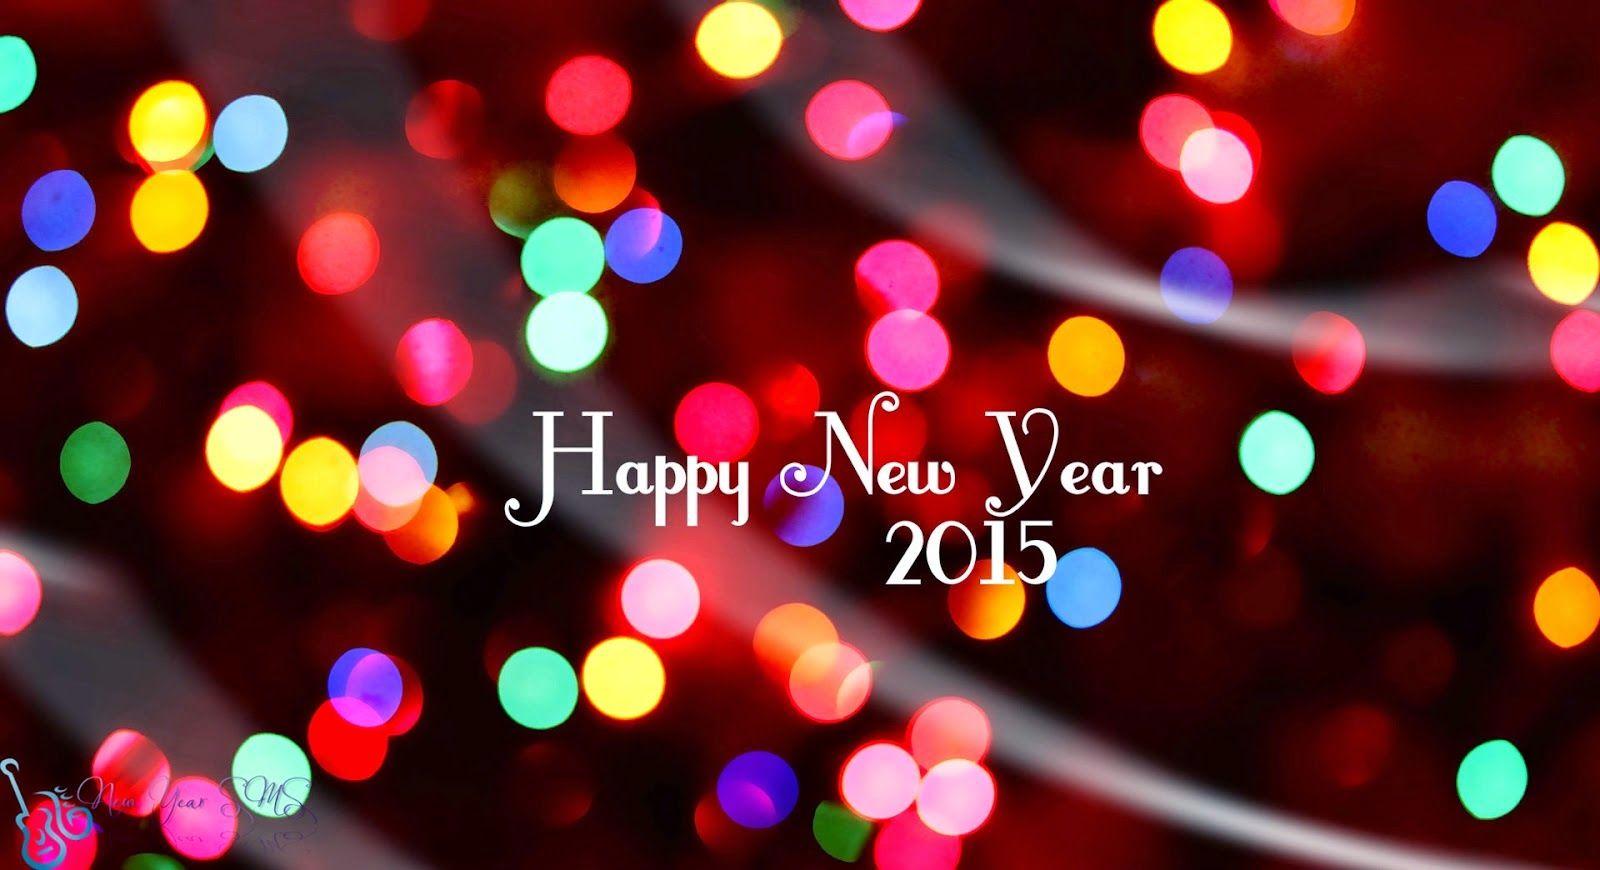 Happy New Year 2015 Advance HD Wallpaper Image Photo Picture